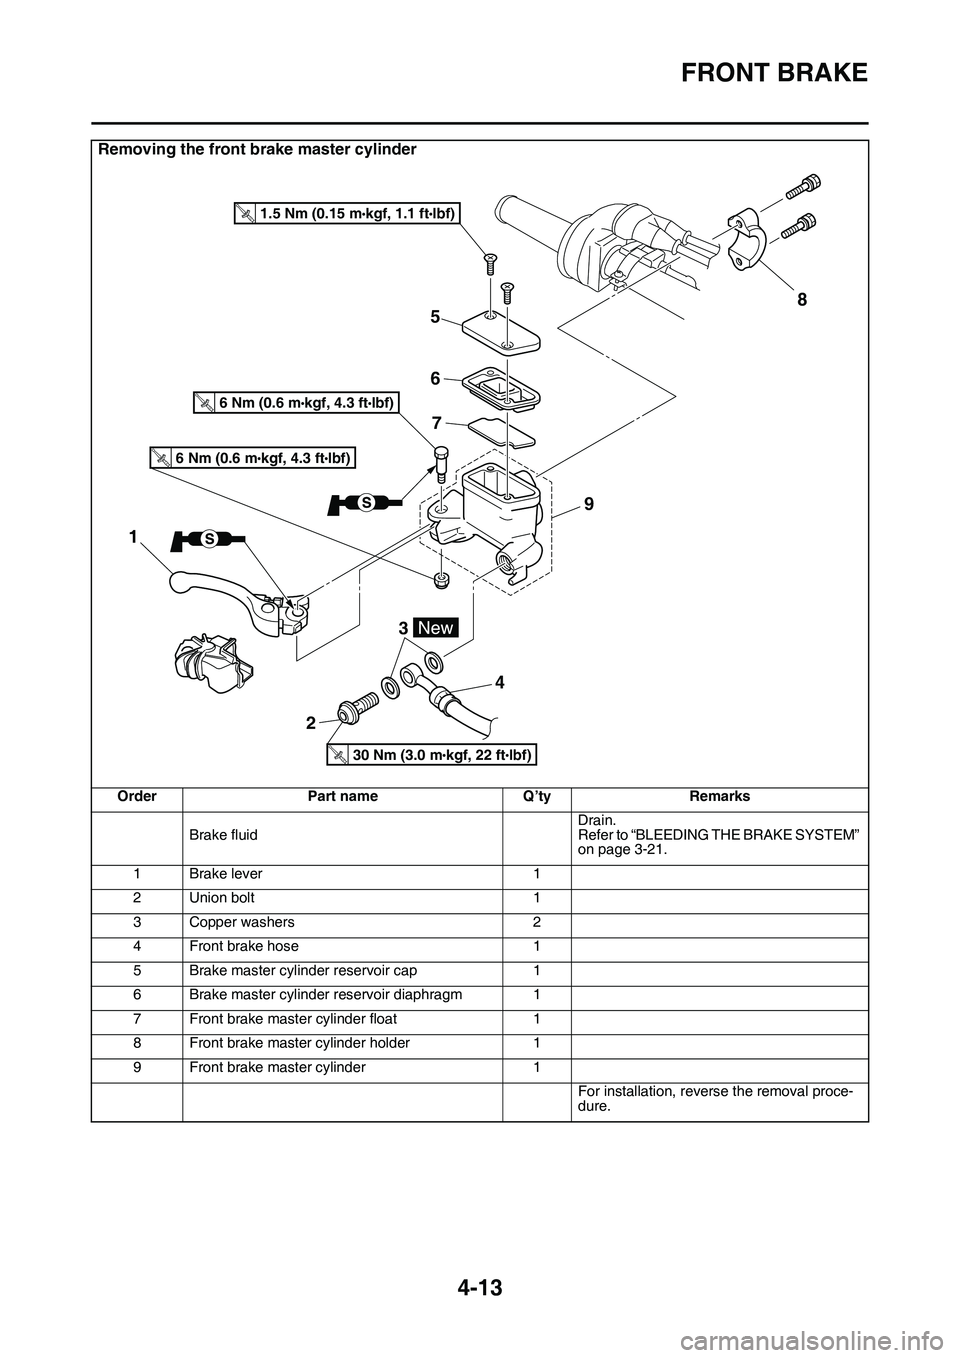 YAMAHA YZ450F 2014  Owners Manual FRONT BRAKE
4-13
Removing the front brake master cylinder
OrderPart nameQ’tyRemarks
Brake fluidDrain.Refer to “BLEEDING THE BRAKE SYSTEM” on page 3-21.
1Brake lever1
2Union bolt1
3Copper washers